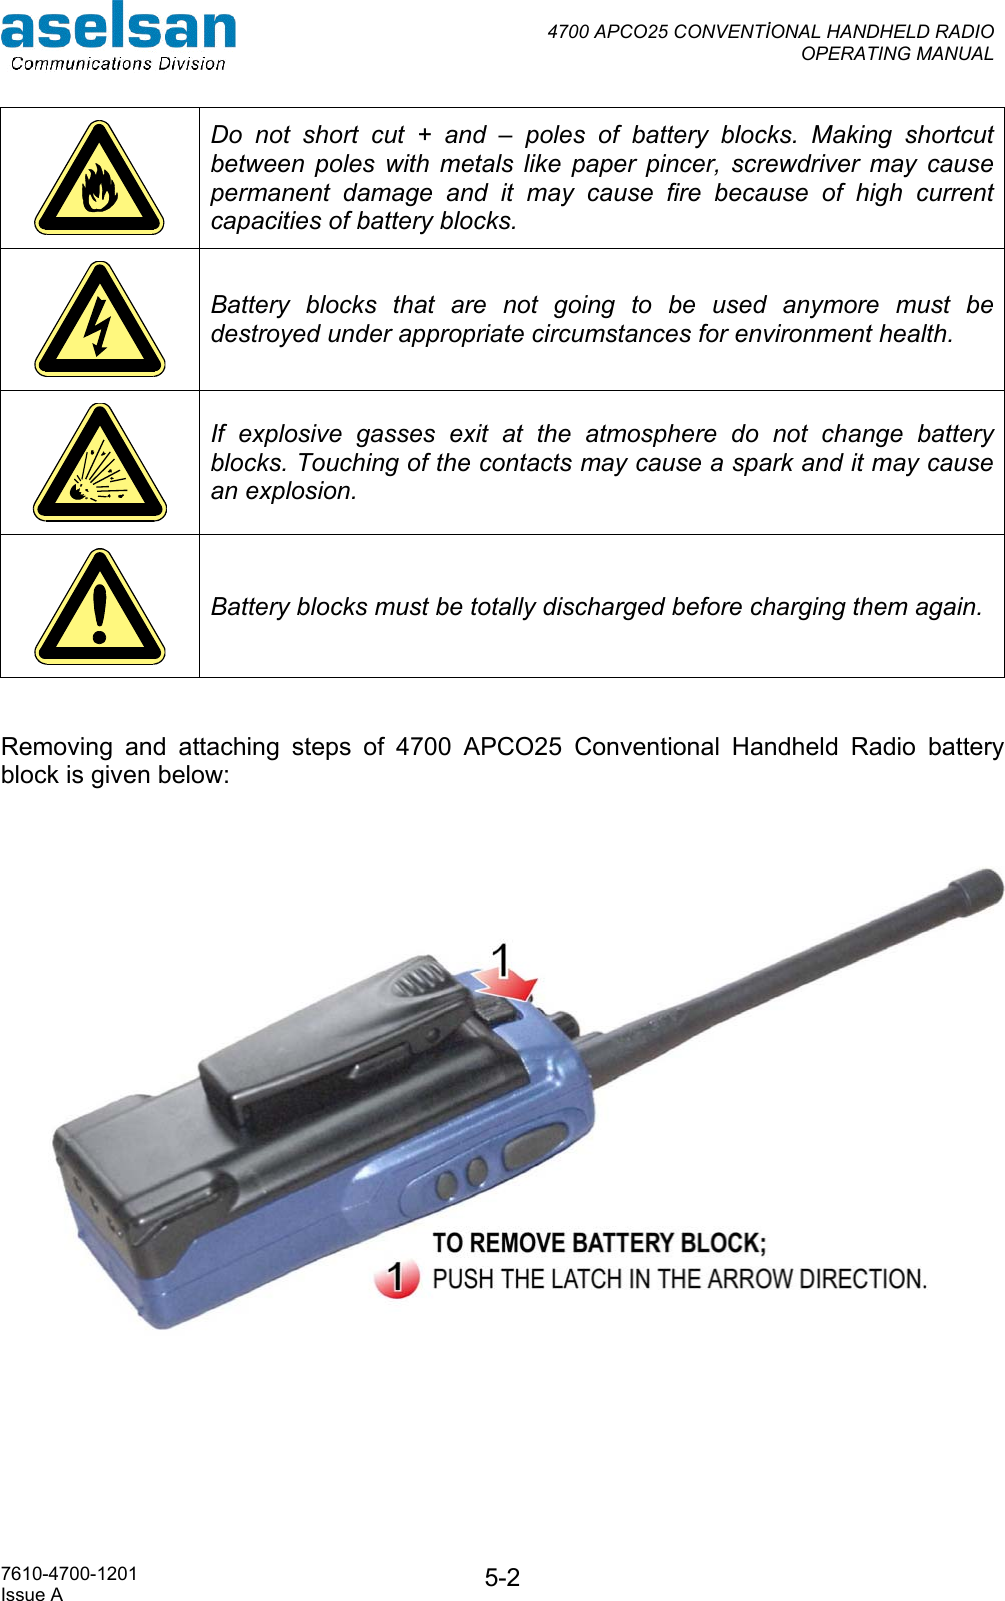  4700 APCO25 CONVENTİONAL HANDHELD RADIO  OPERATING MANUAL   7610-4700-1201 Issue A  5-2 Do not short cut + and – poles of battery blocks. Making shortcut between poles with metals like paper pincer, screwdriver may cause permanent damage and it may cause fire because of high current capacities of battery blocks.  Battery blocks that are not going to be used anymore must be destroyed under appropriate circumstances for environment health.  If explosive gasses exit at the atmosphere do not change battery blocks. Touching of the contacts may cause a spark and it may cause an explosion.  Battery blocks must be totally discharged before charging them again.   Removing and attaching steps of 4700 APCO25 Conventional Handheld Radio battery block is given below:    